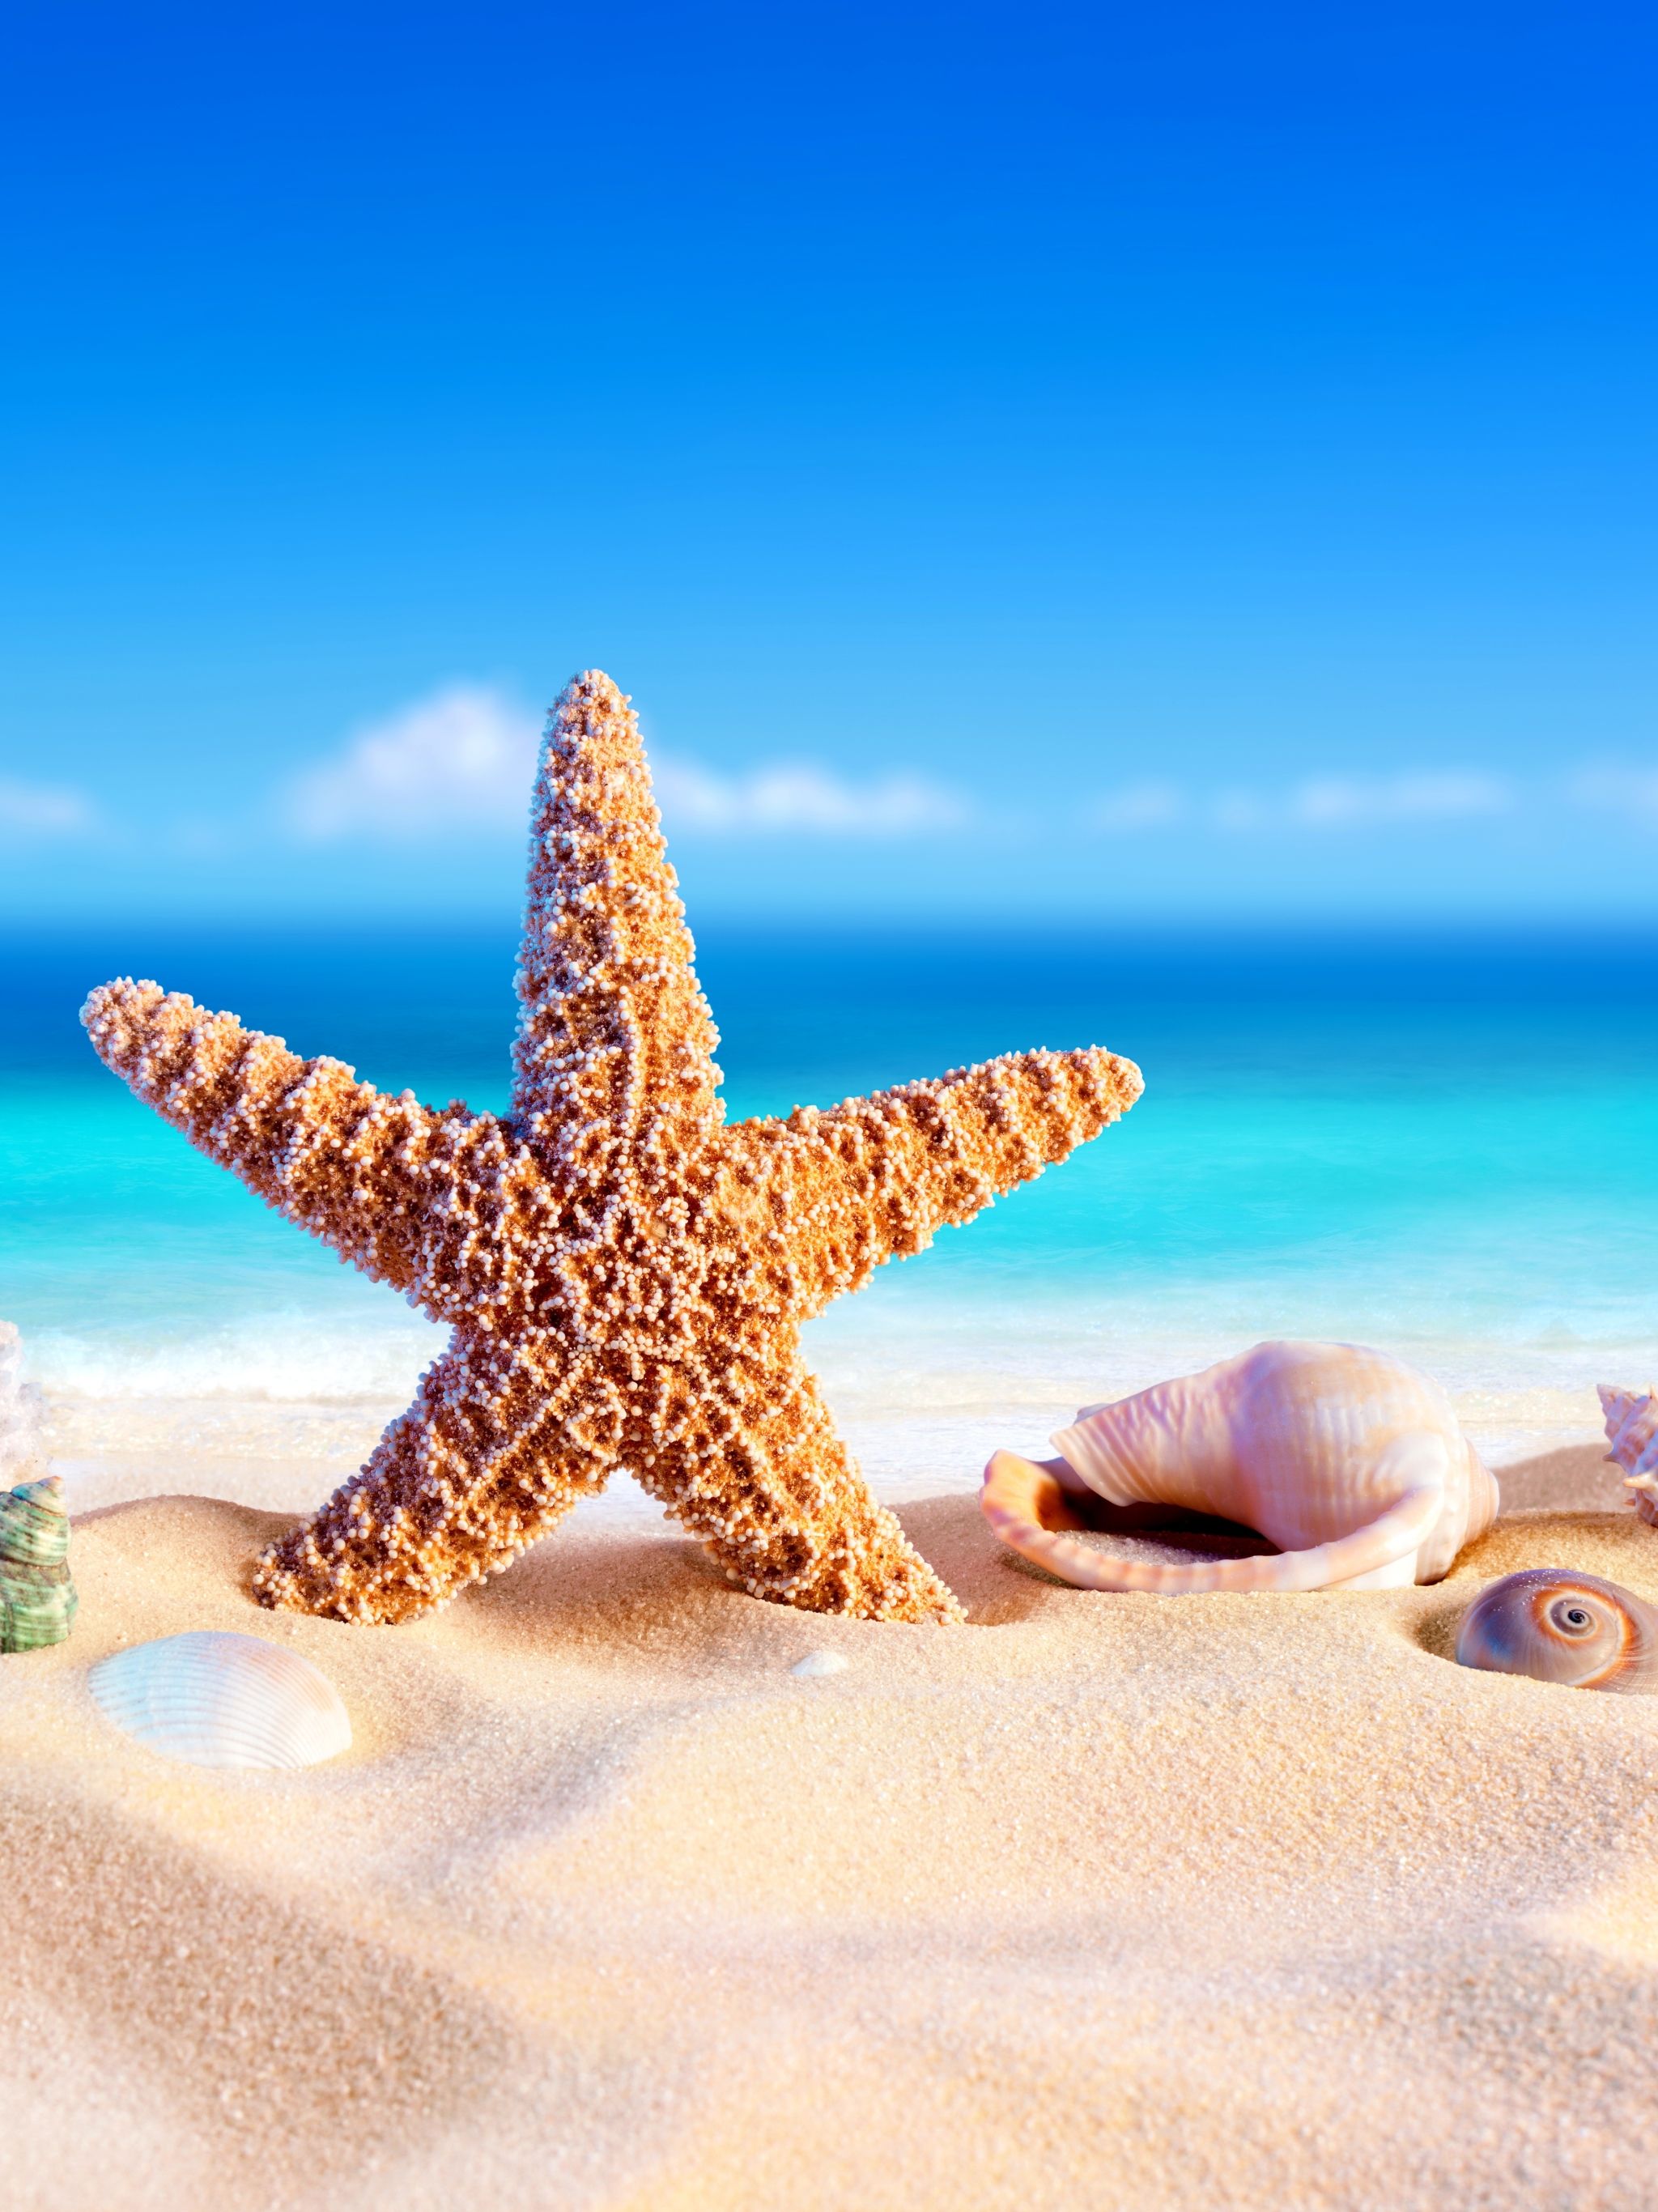 Download Starfish wallpaper for mobile phone, free Starfish HD picture